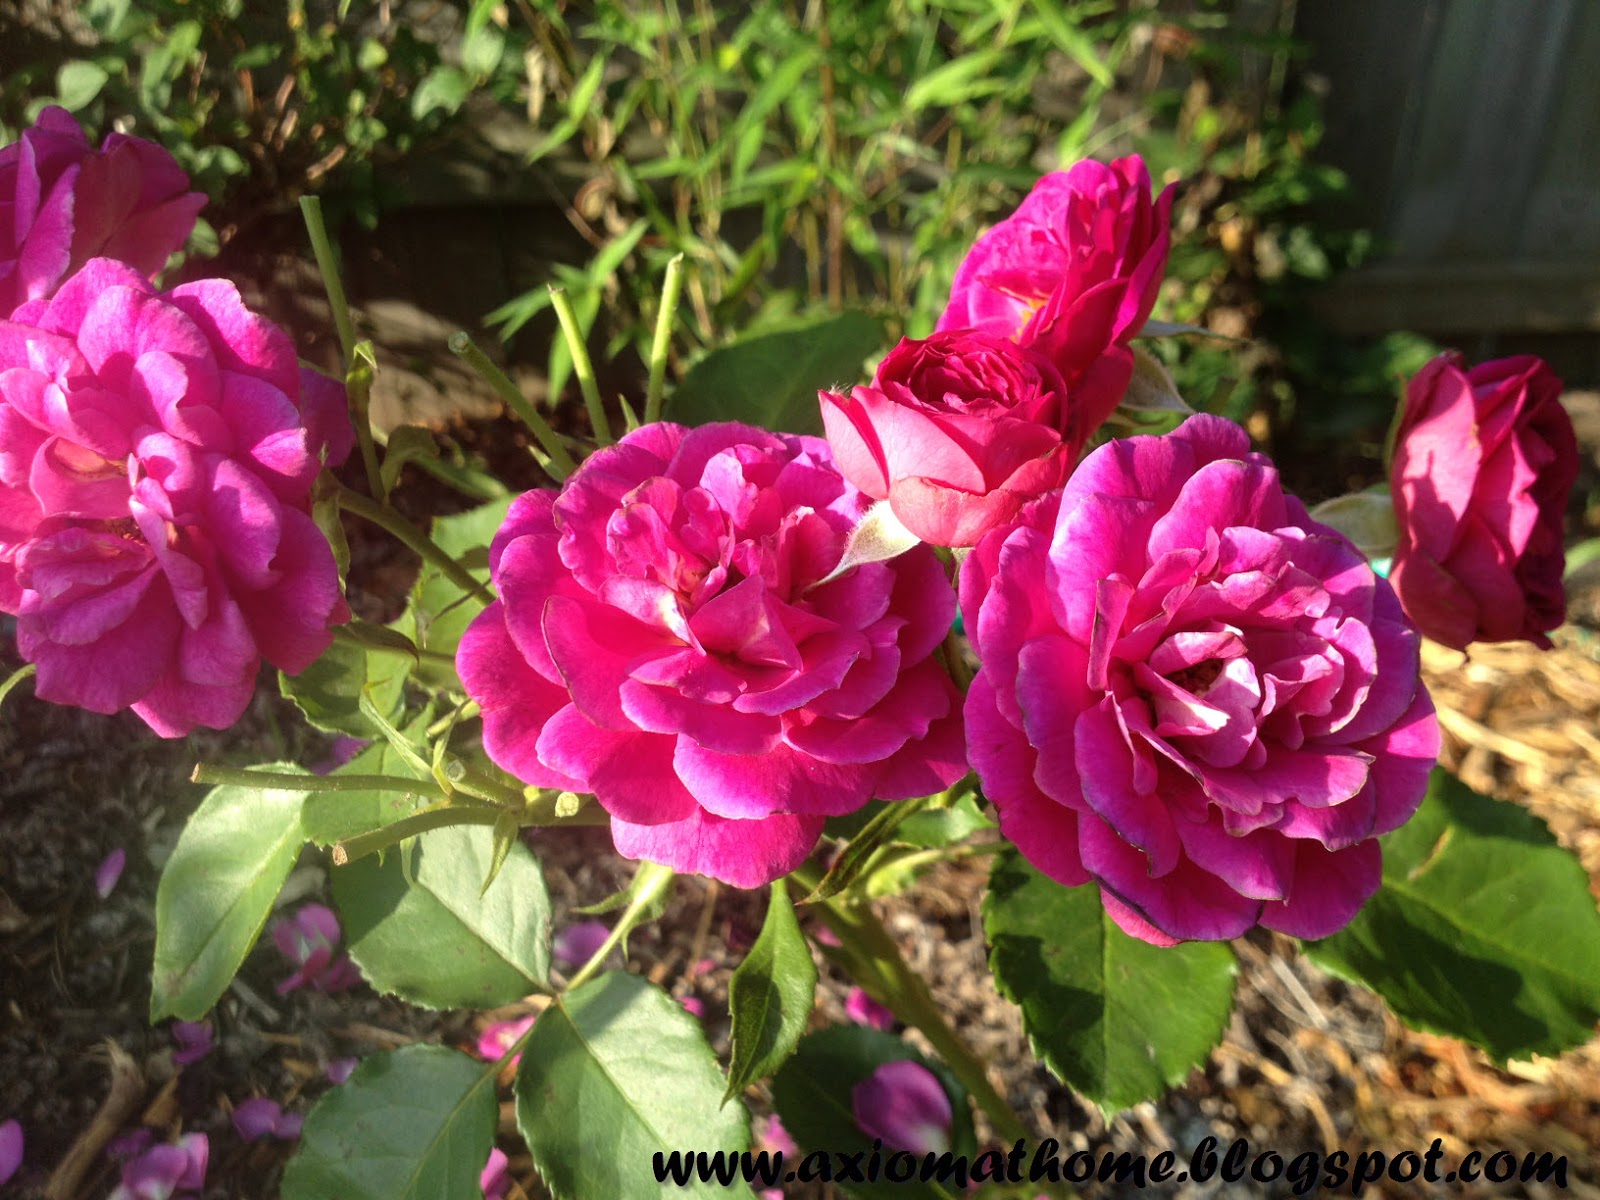 Axiom At Home: Natural Treatments for Black Spot (on Roses)